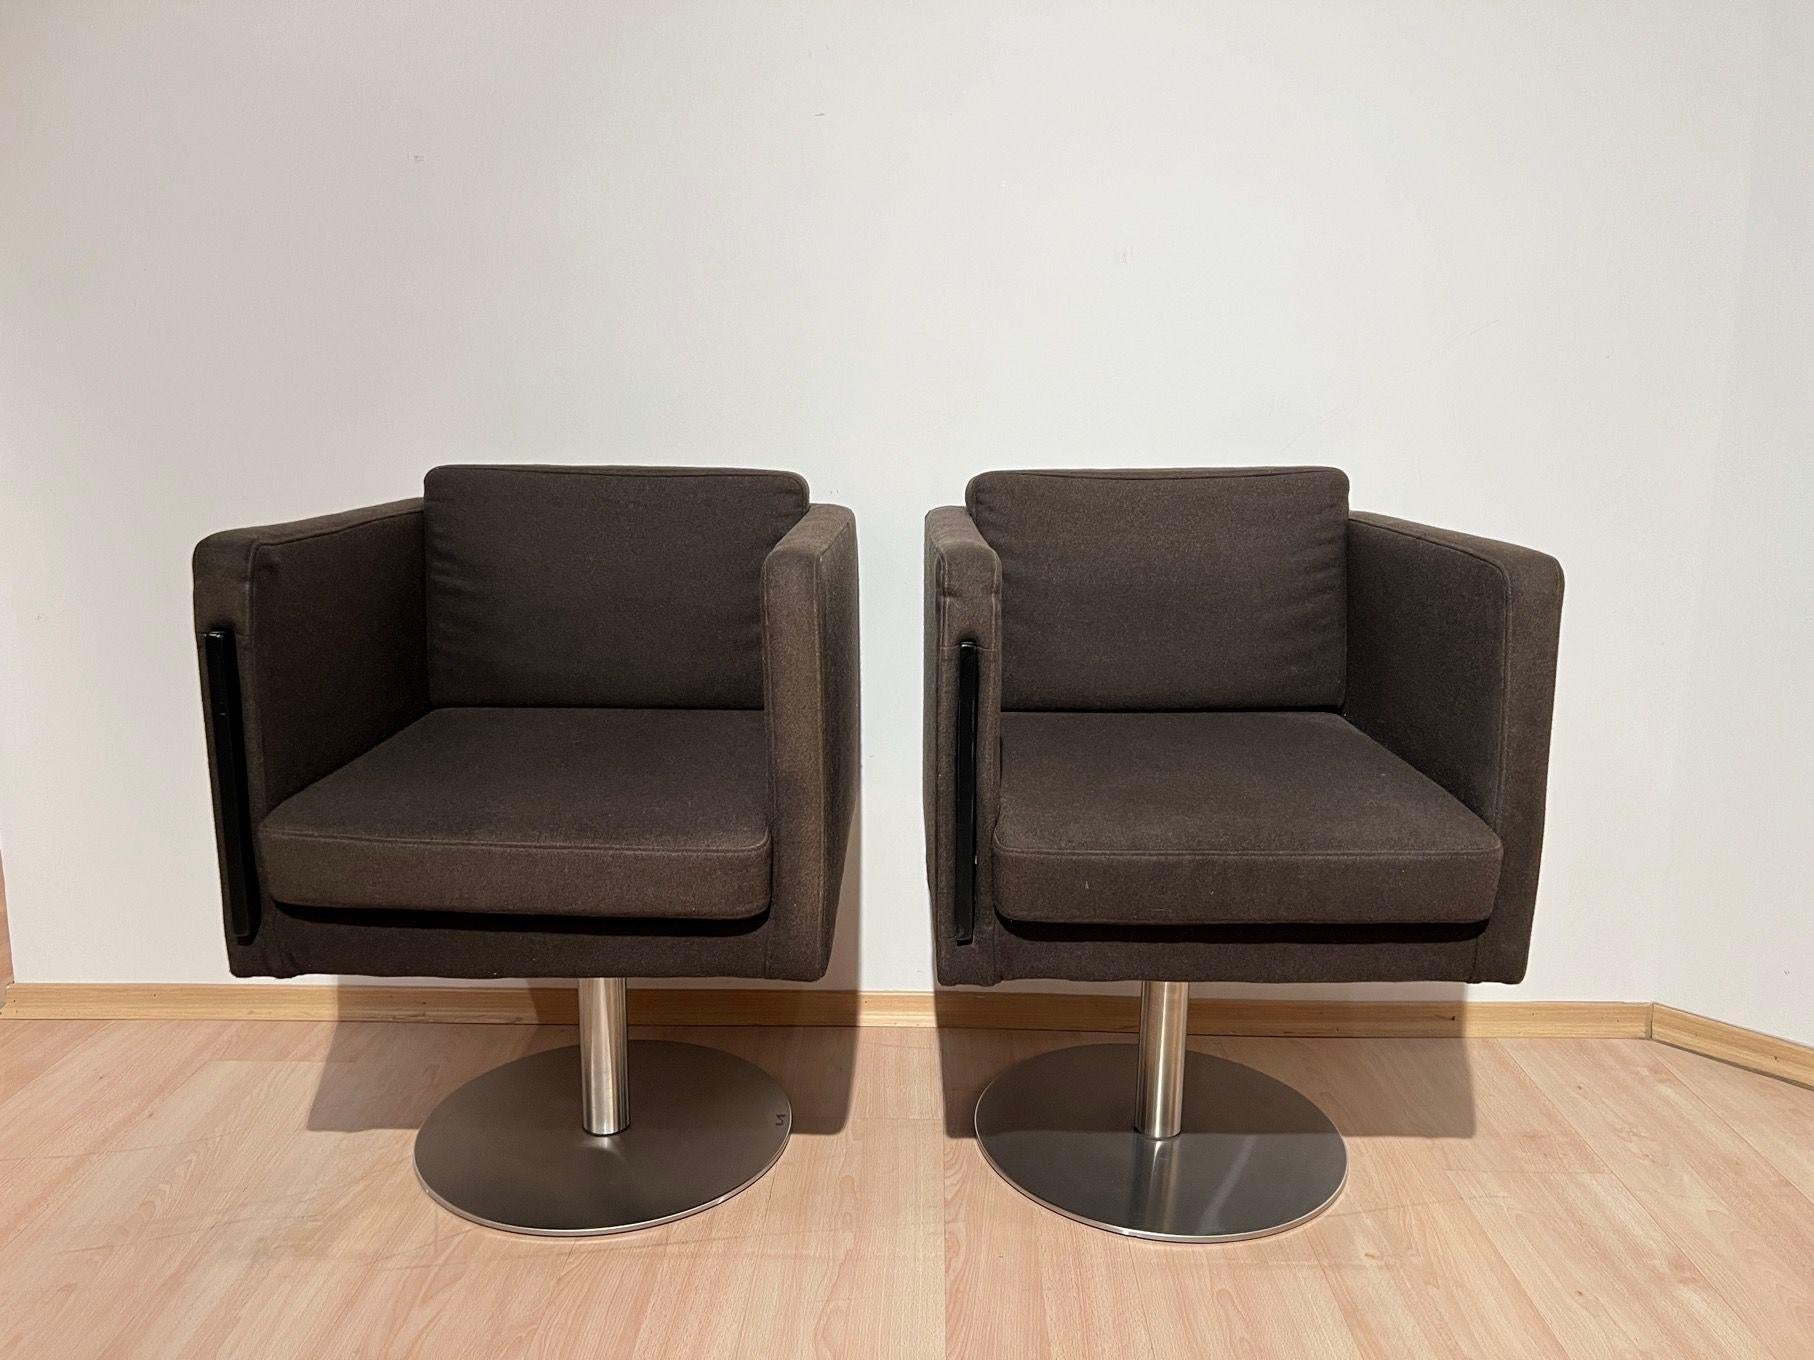 Pair of cubic Swivel Chairs with Tableau by Lensvelt, Netherlands, early 21st C.
* Design: Dirk Van Berkel
* Model: „Deejay“ (2001)
Cubic shape. Mocca Brown Original Felt in very good condition.
Standing on brushed stainless steel bar and round